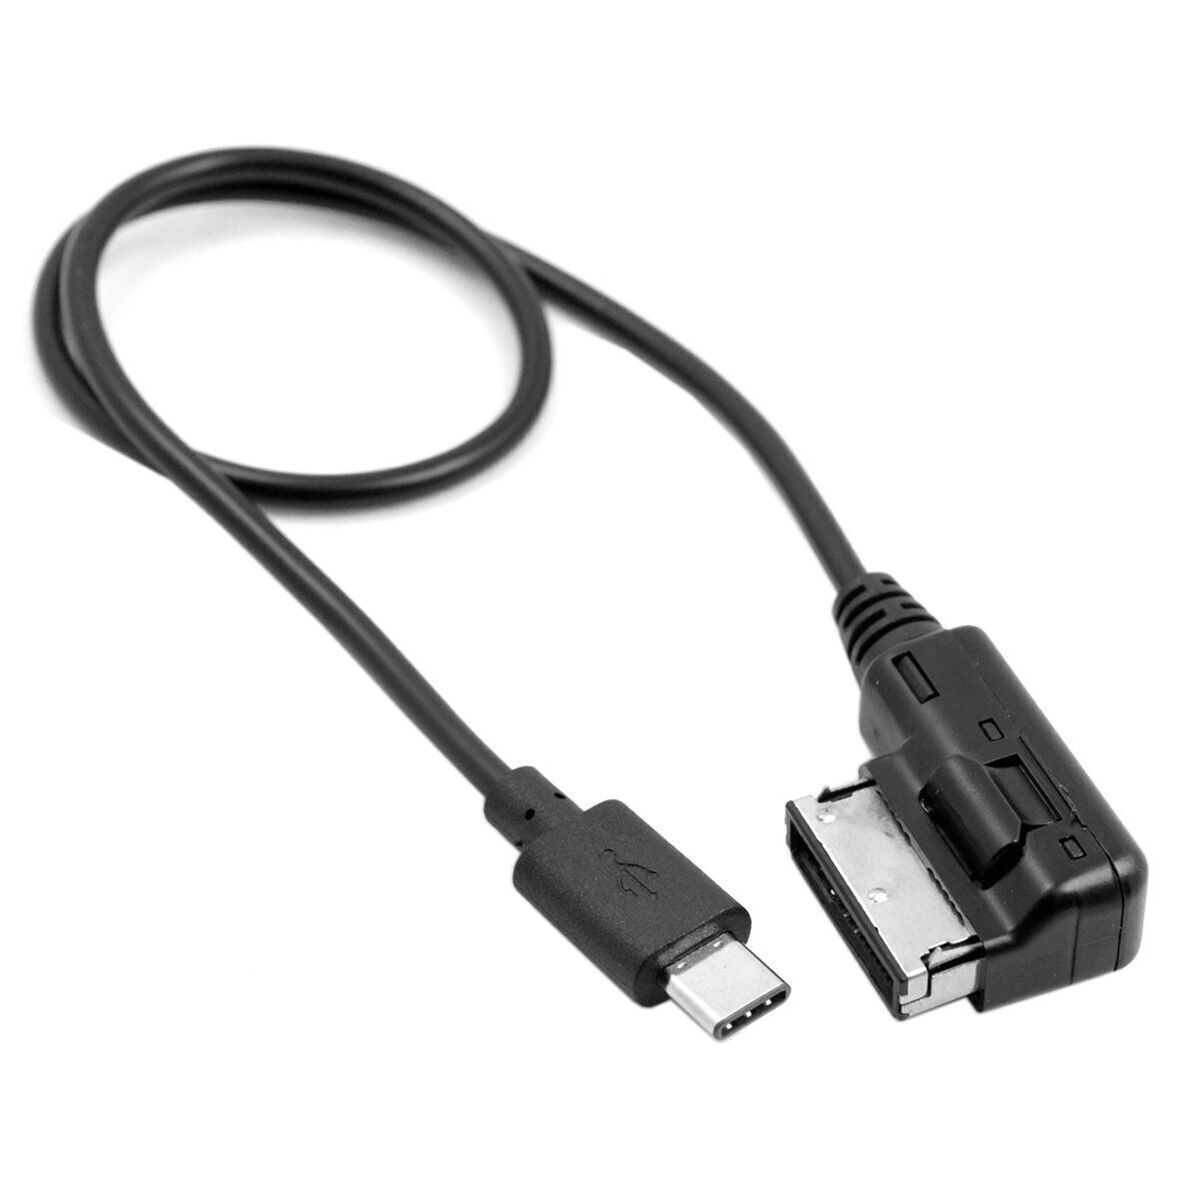 AMI MDI USB-C USB 3.1 Type C Charge Adapter Cable  For Car VW AUDI Media In  MMI